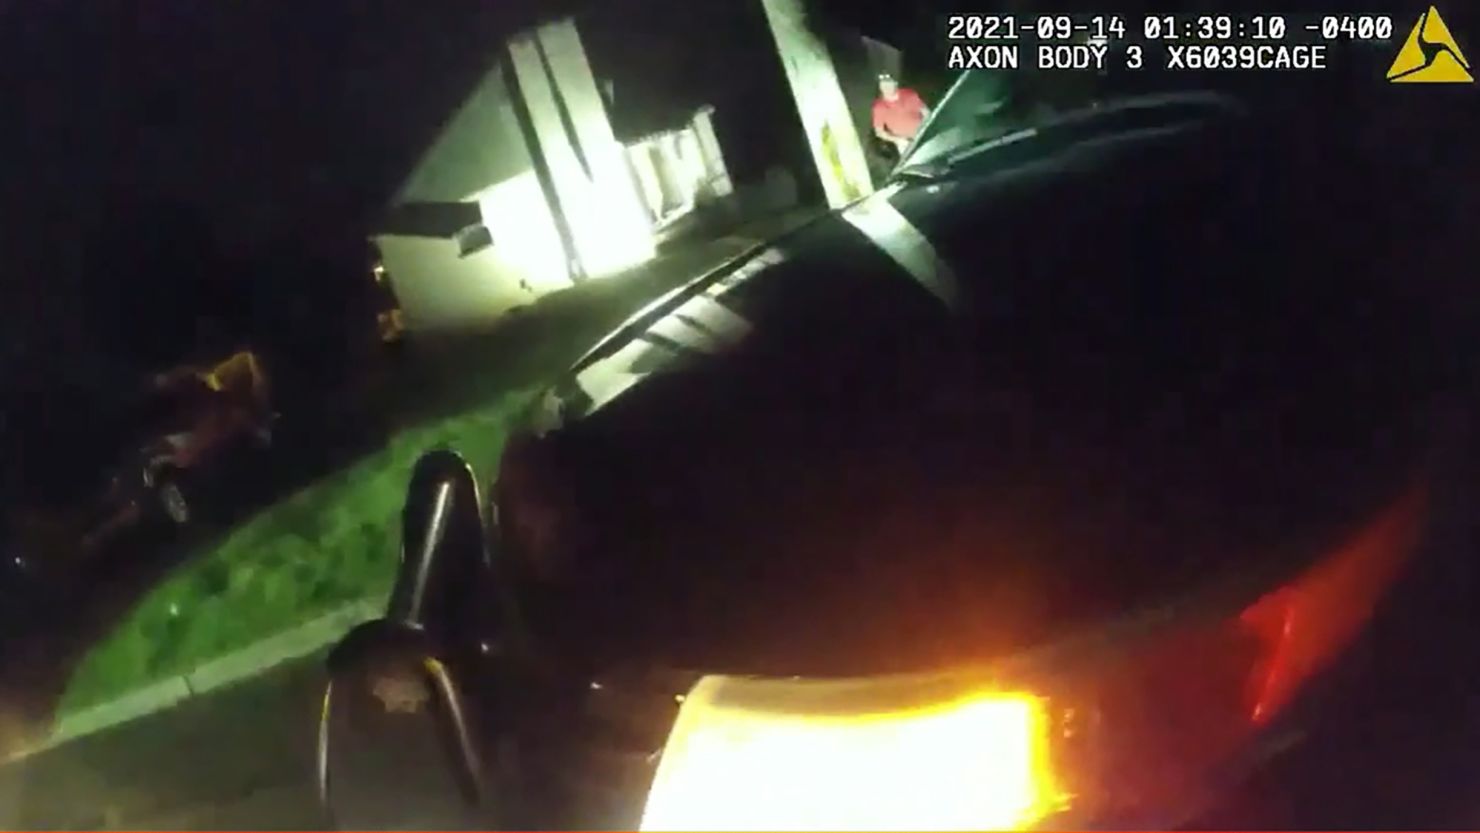 A frame from Officer Salvatore Oldrati's body camera shows the scene moments after leaving his vehicle on September 14, 2021.